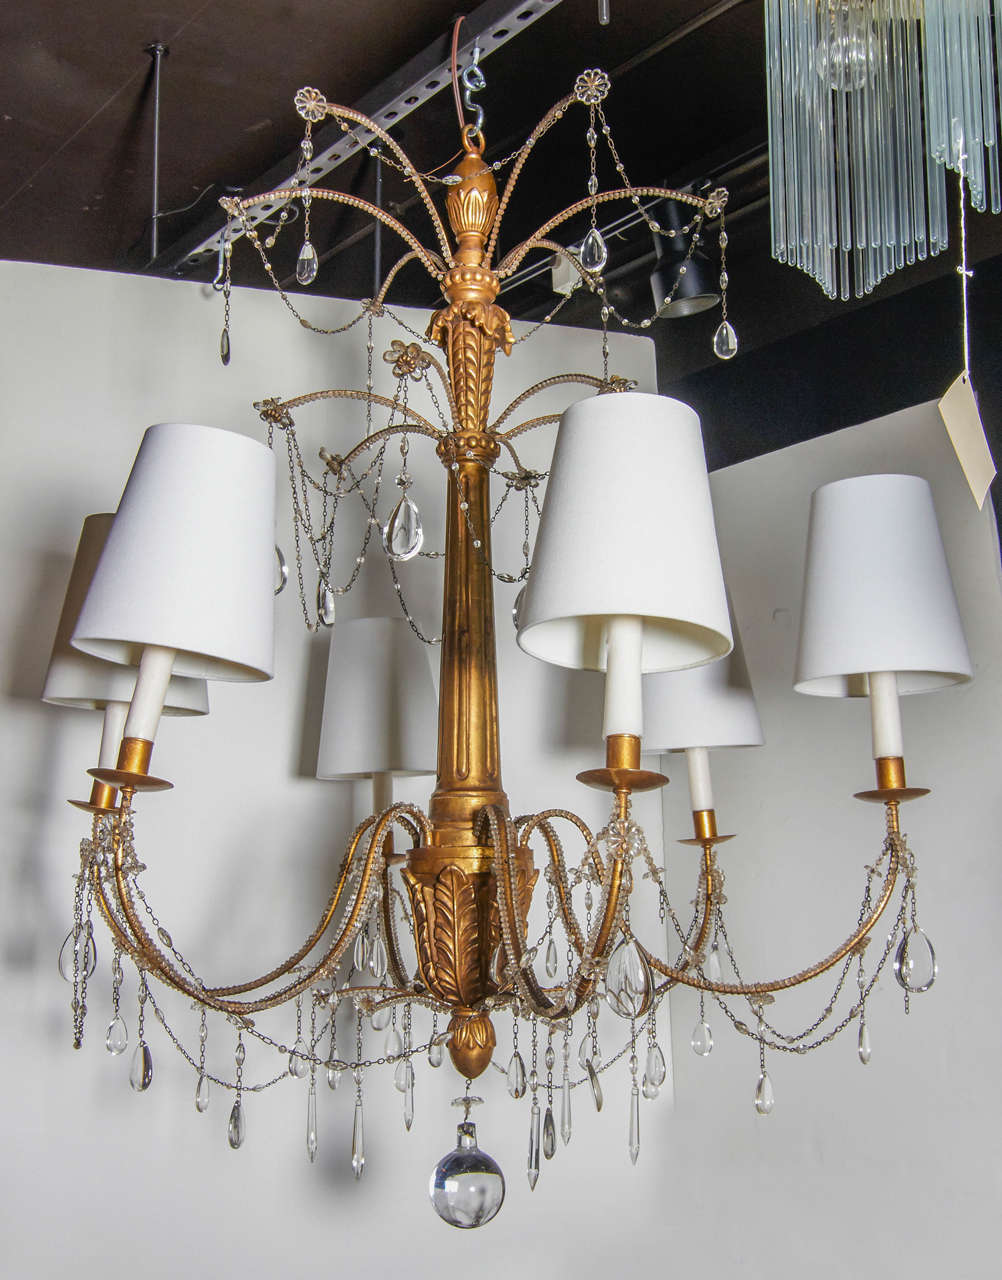 Glamorous chandelier with 22-karart gold leafing over hand-carved wood. The chandelier features six scrolled arms and has stylized acanthus leaf designs throughout. The chandelier features hanging cut crystals pendants and crystal beading along with